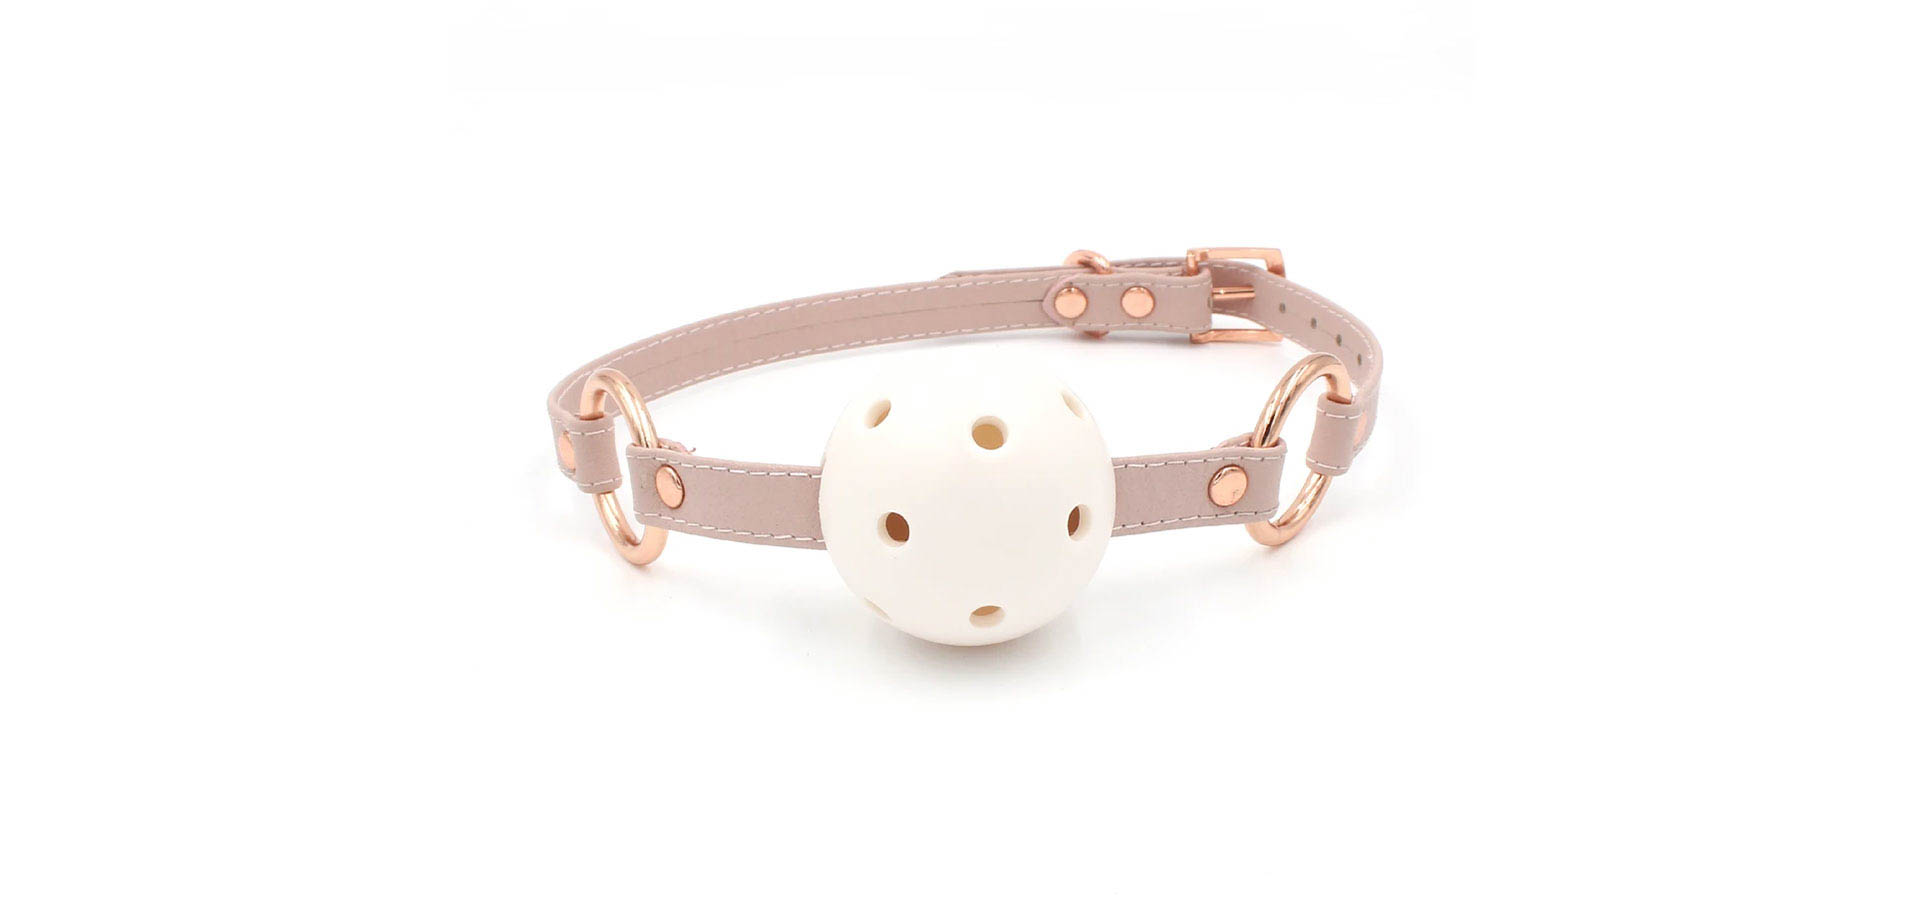 Deluxe Ball Gag in Blush Pink.